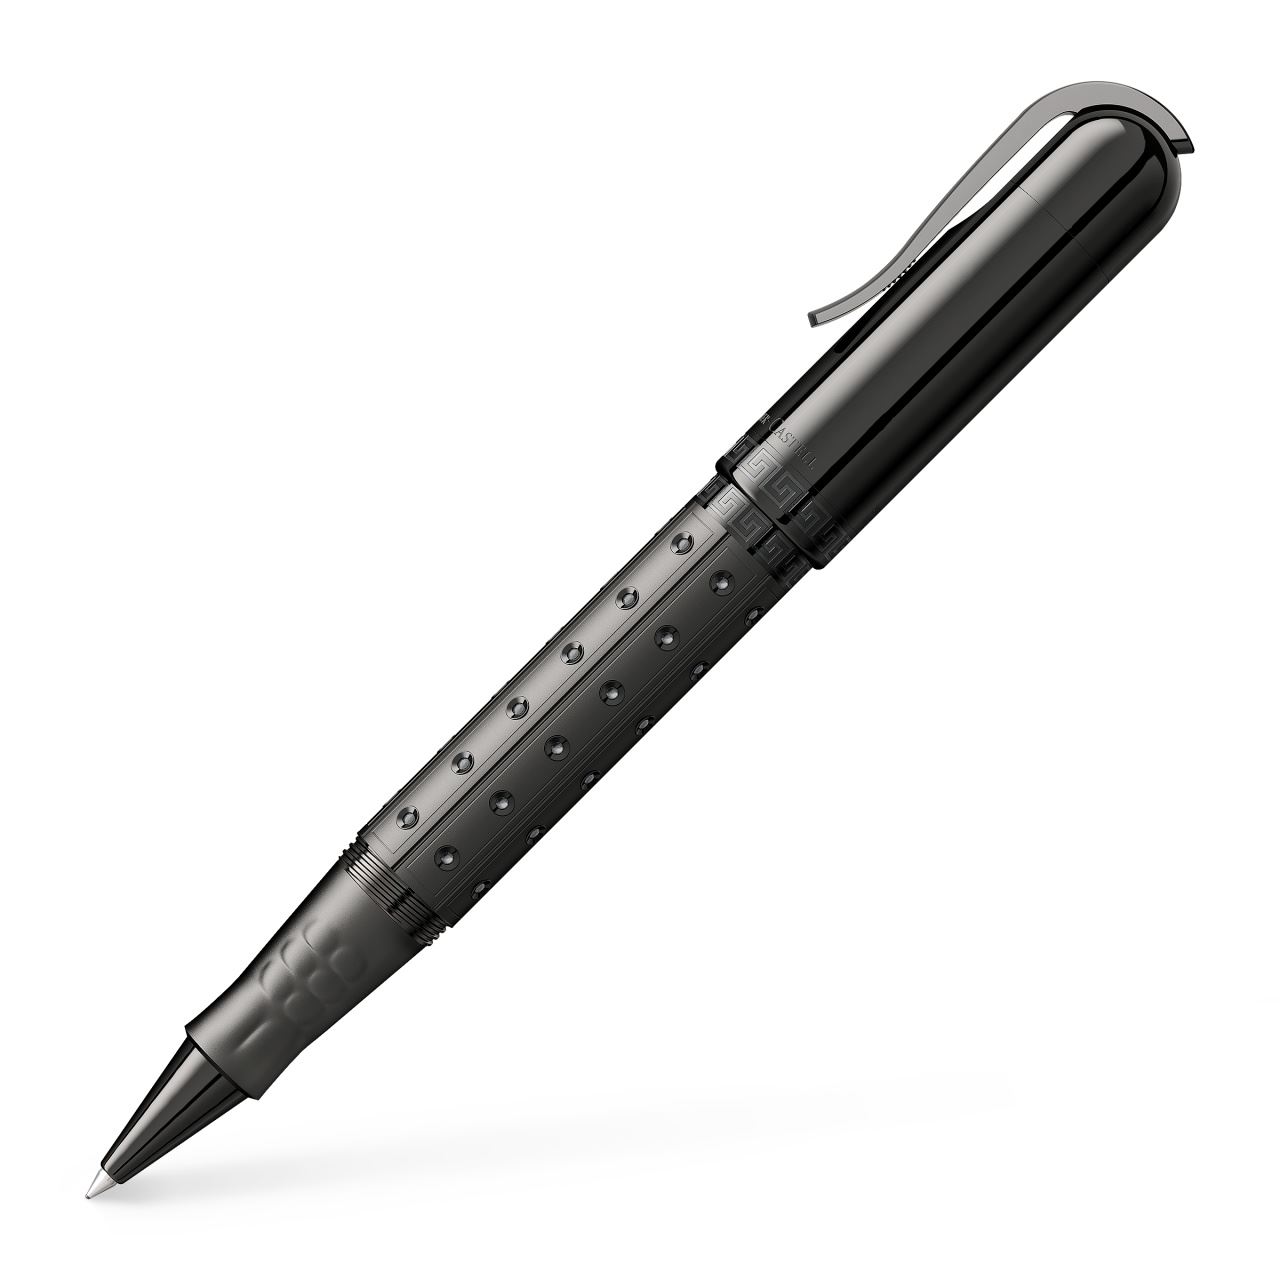 Graf-von-Faber-Castell - Rollerball pen Pen of the Year 2020 Black Edition